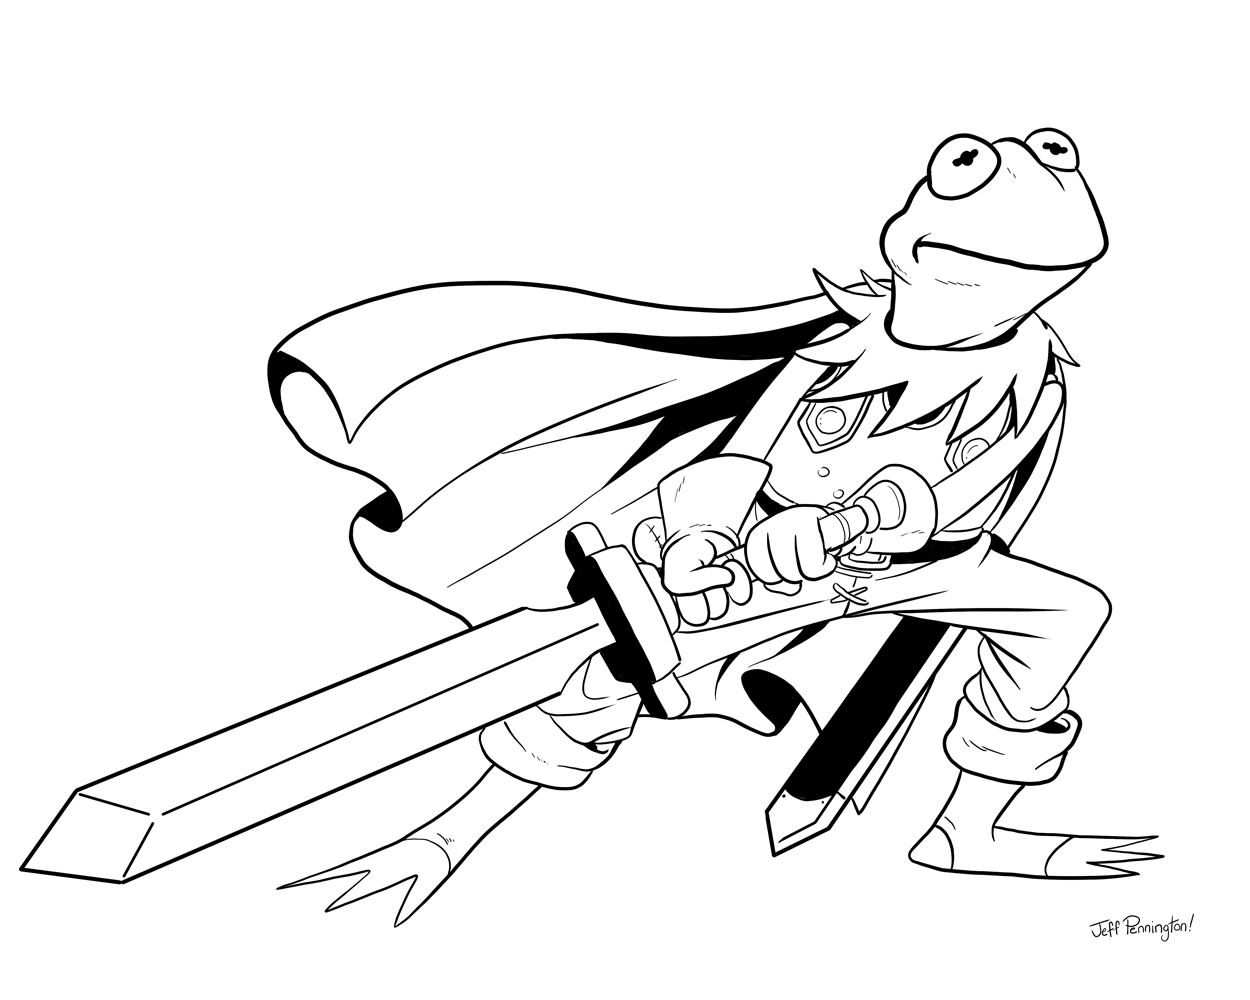 Young sandwich on x remember when i said i drew a real cool kermit well here ya go